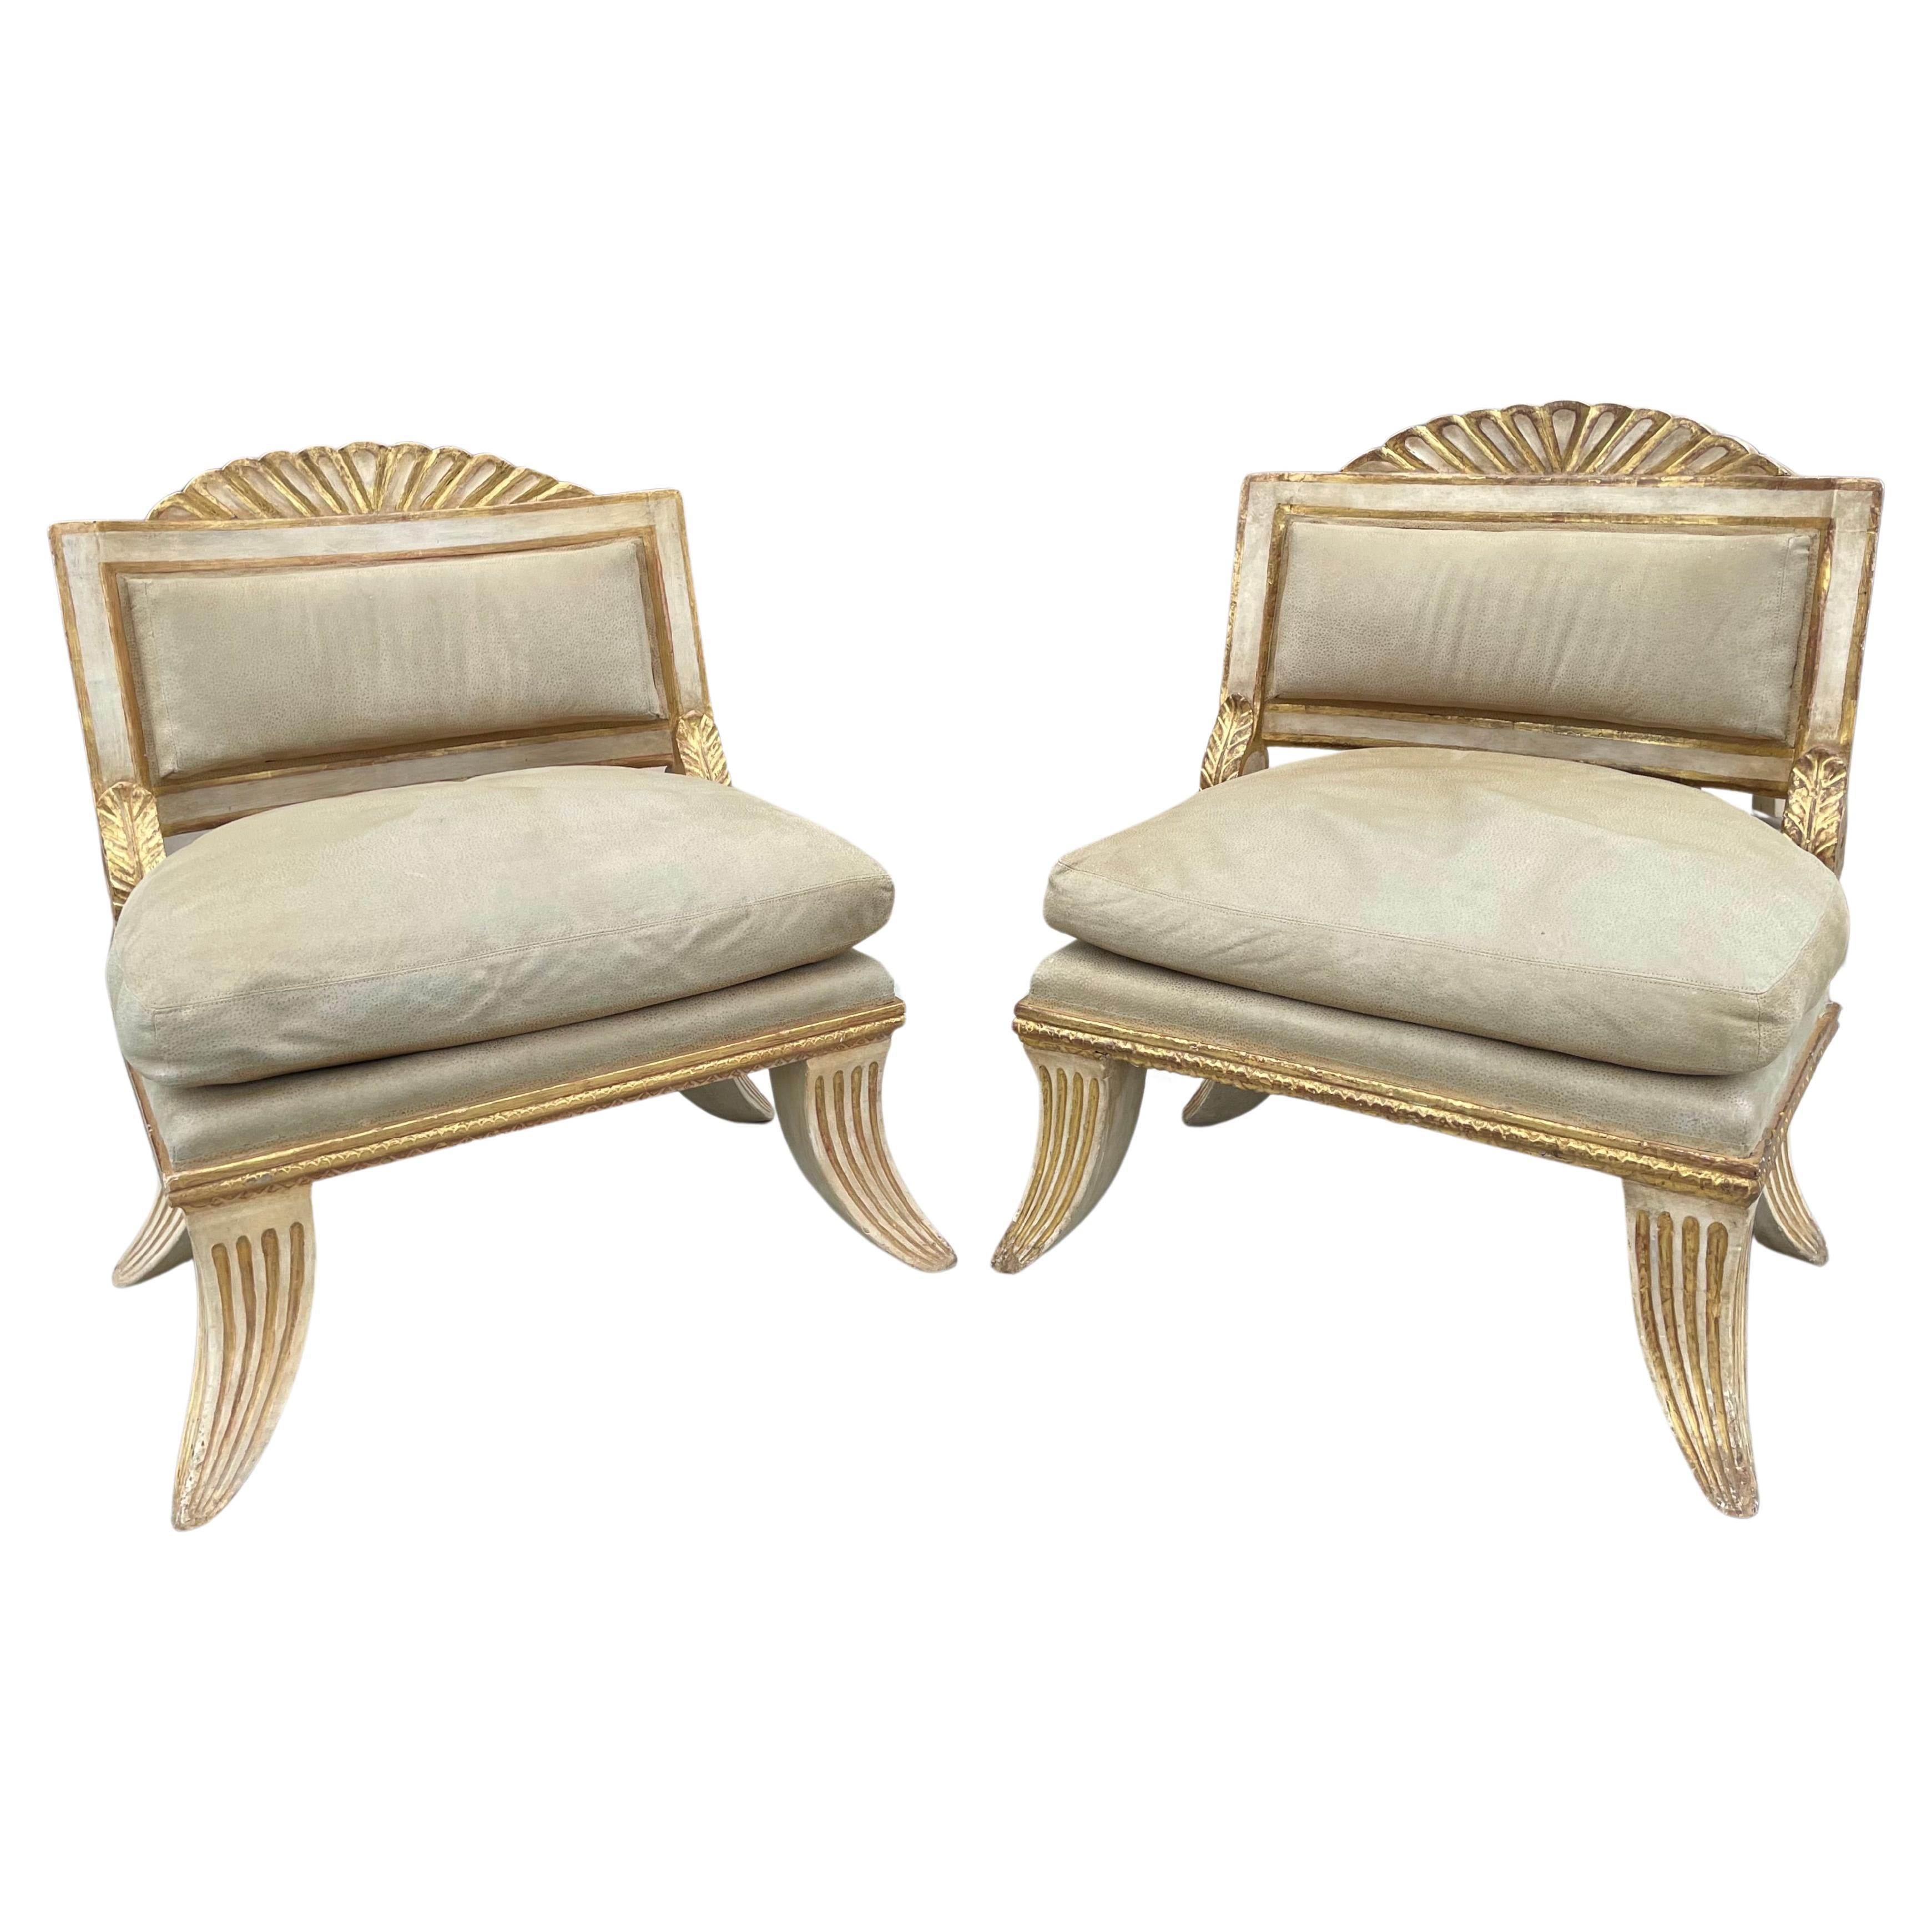 Magnificent Pair of Swedish Style Lounge Chairs from a Seacliff SF Mansion